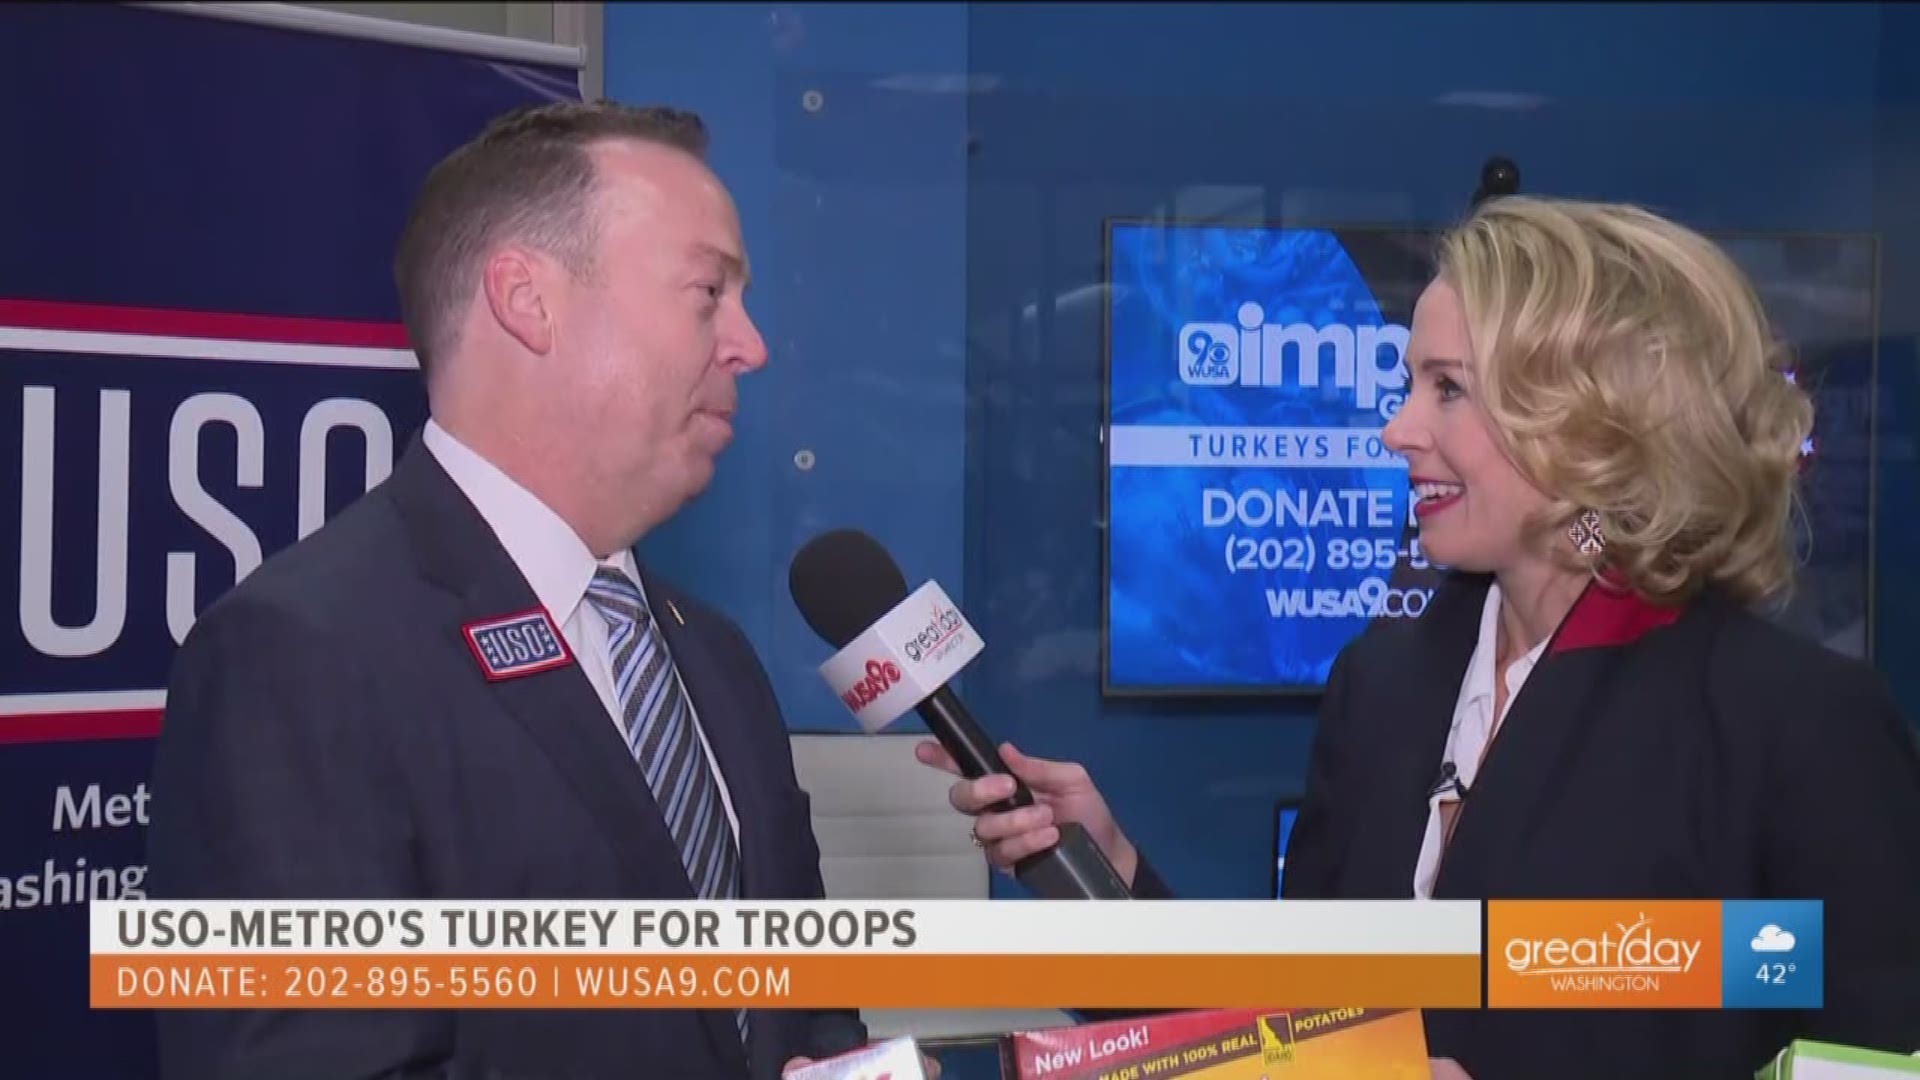 USO-Metro is collecting money for  Turkeys for Troops to help local service members and their families during the Thanksgiving holiday. Paul McQuillan, chairman of the board at USO-Metro talks about the importance of the telethon and focusing on the count